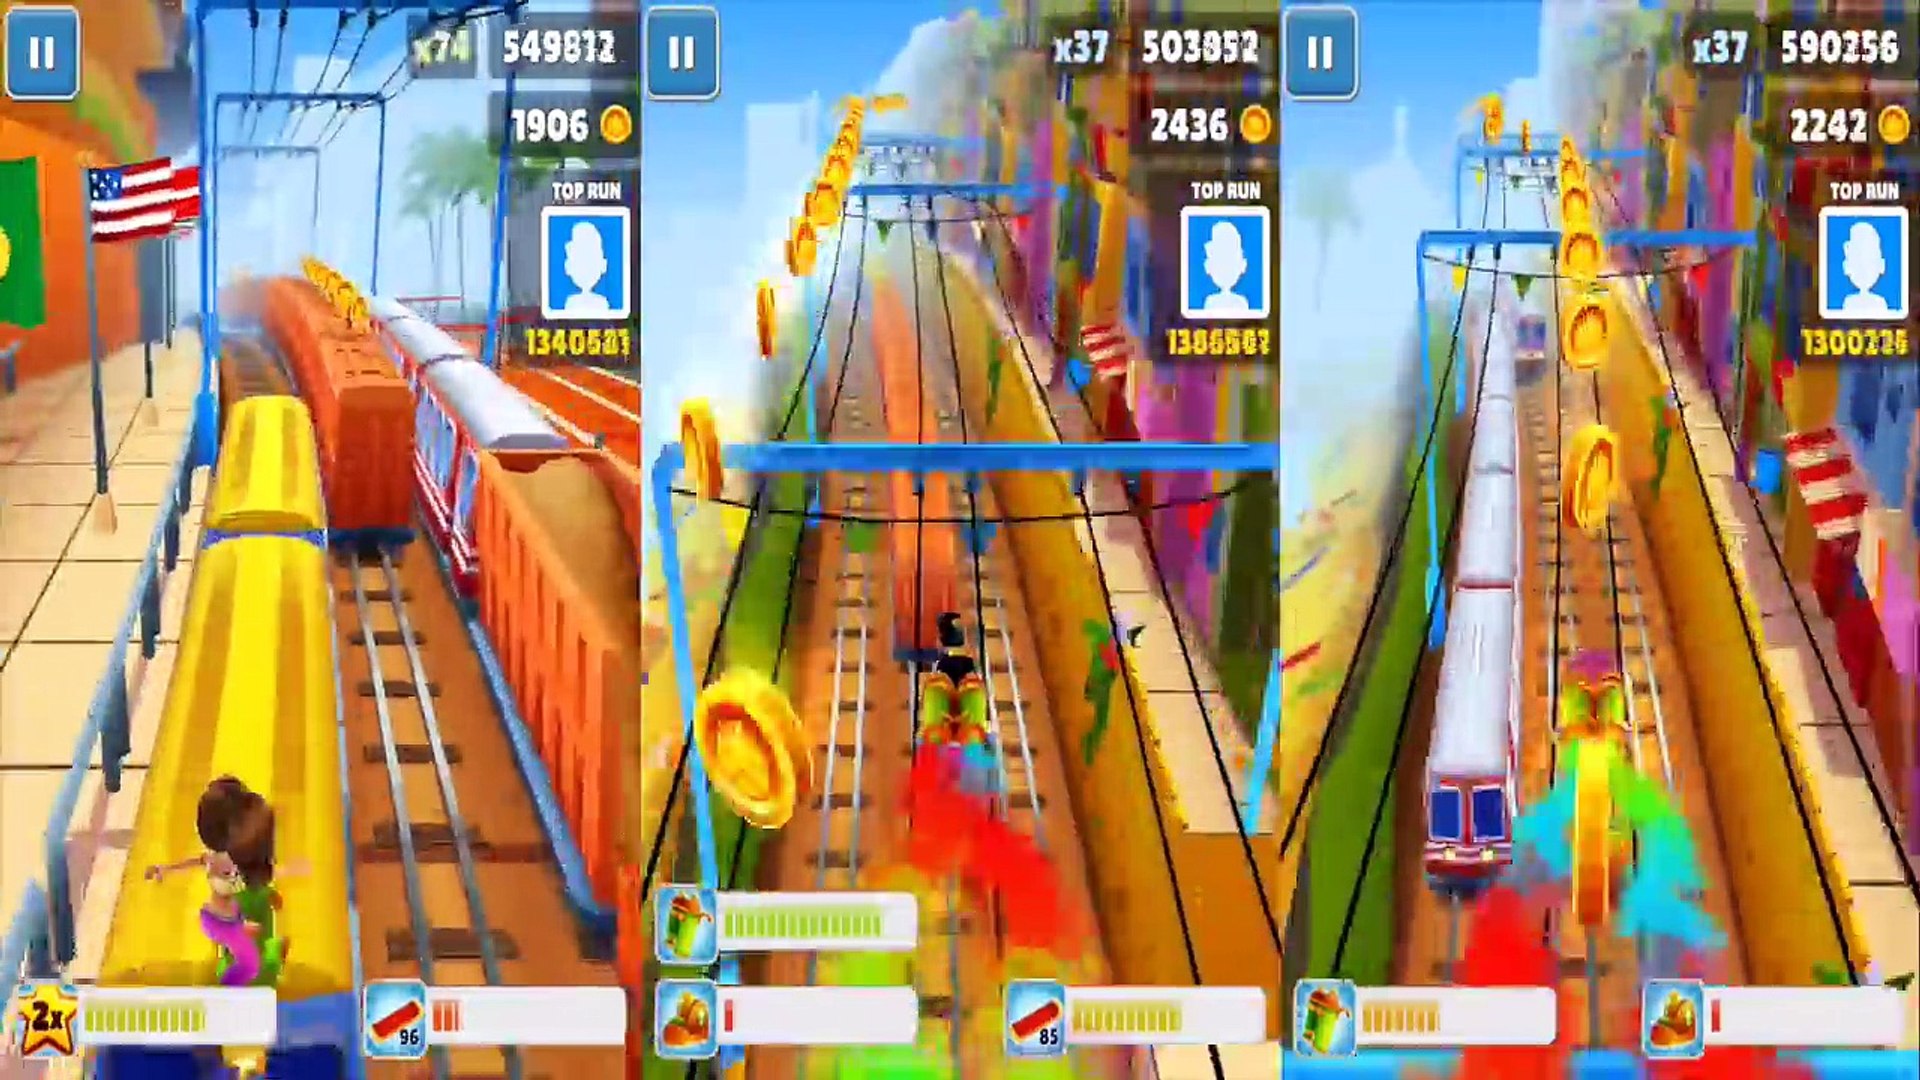 subway surfers - tricky vs tricky camo outfit vs tricky heart outfit 